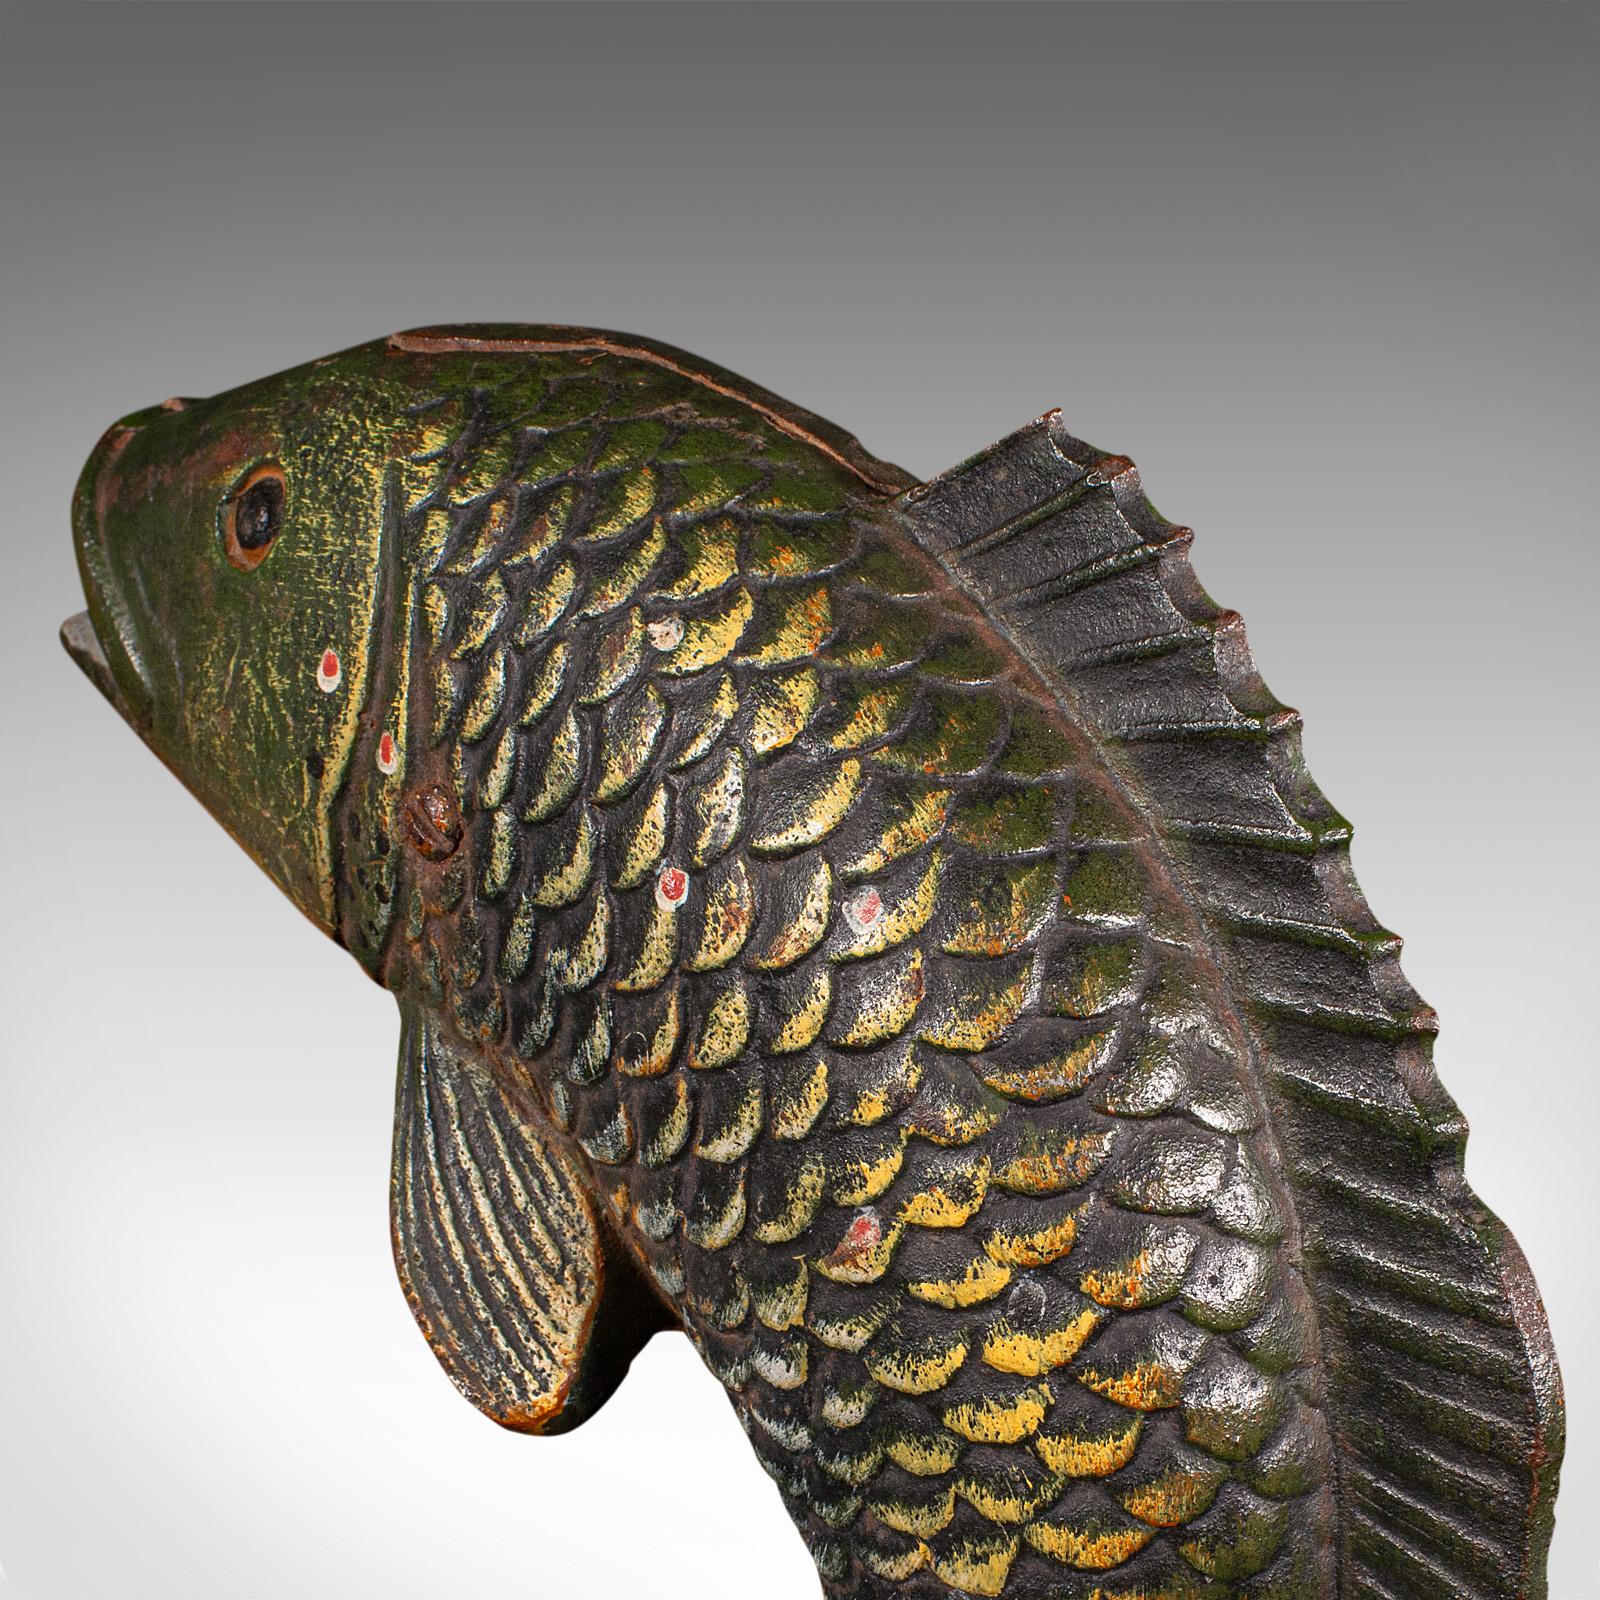 Antique Fish Statue, English, Cast Iron, Angler's Door Stop, Victorian, C.1900 For Sale 2